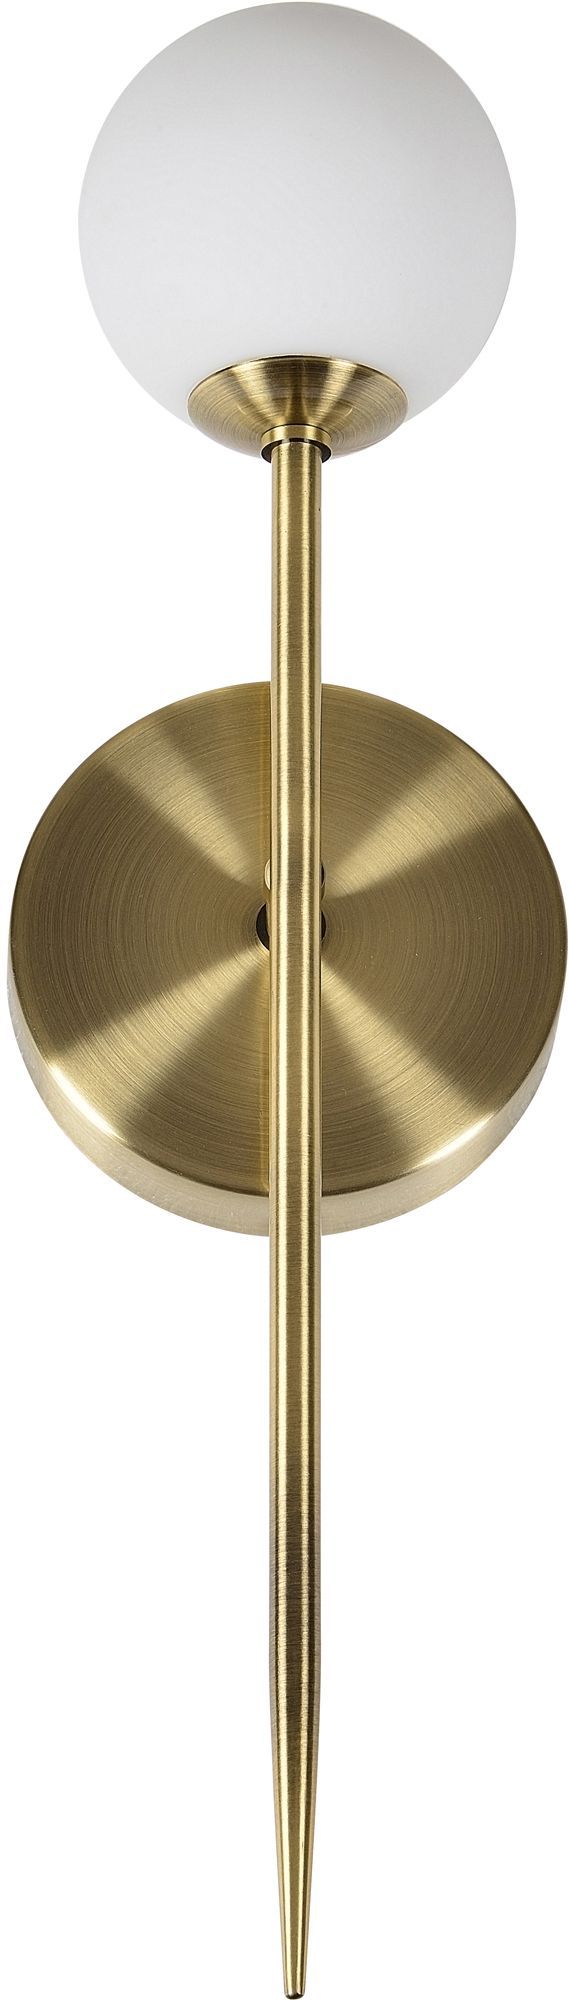 Renwil® Gianni Antique Brass Wall Sconce